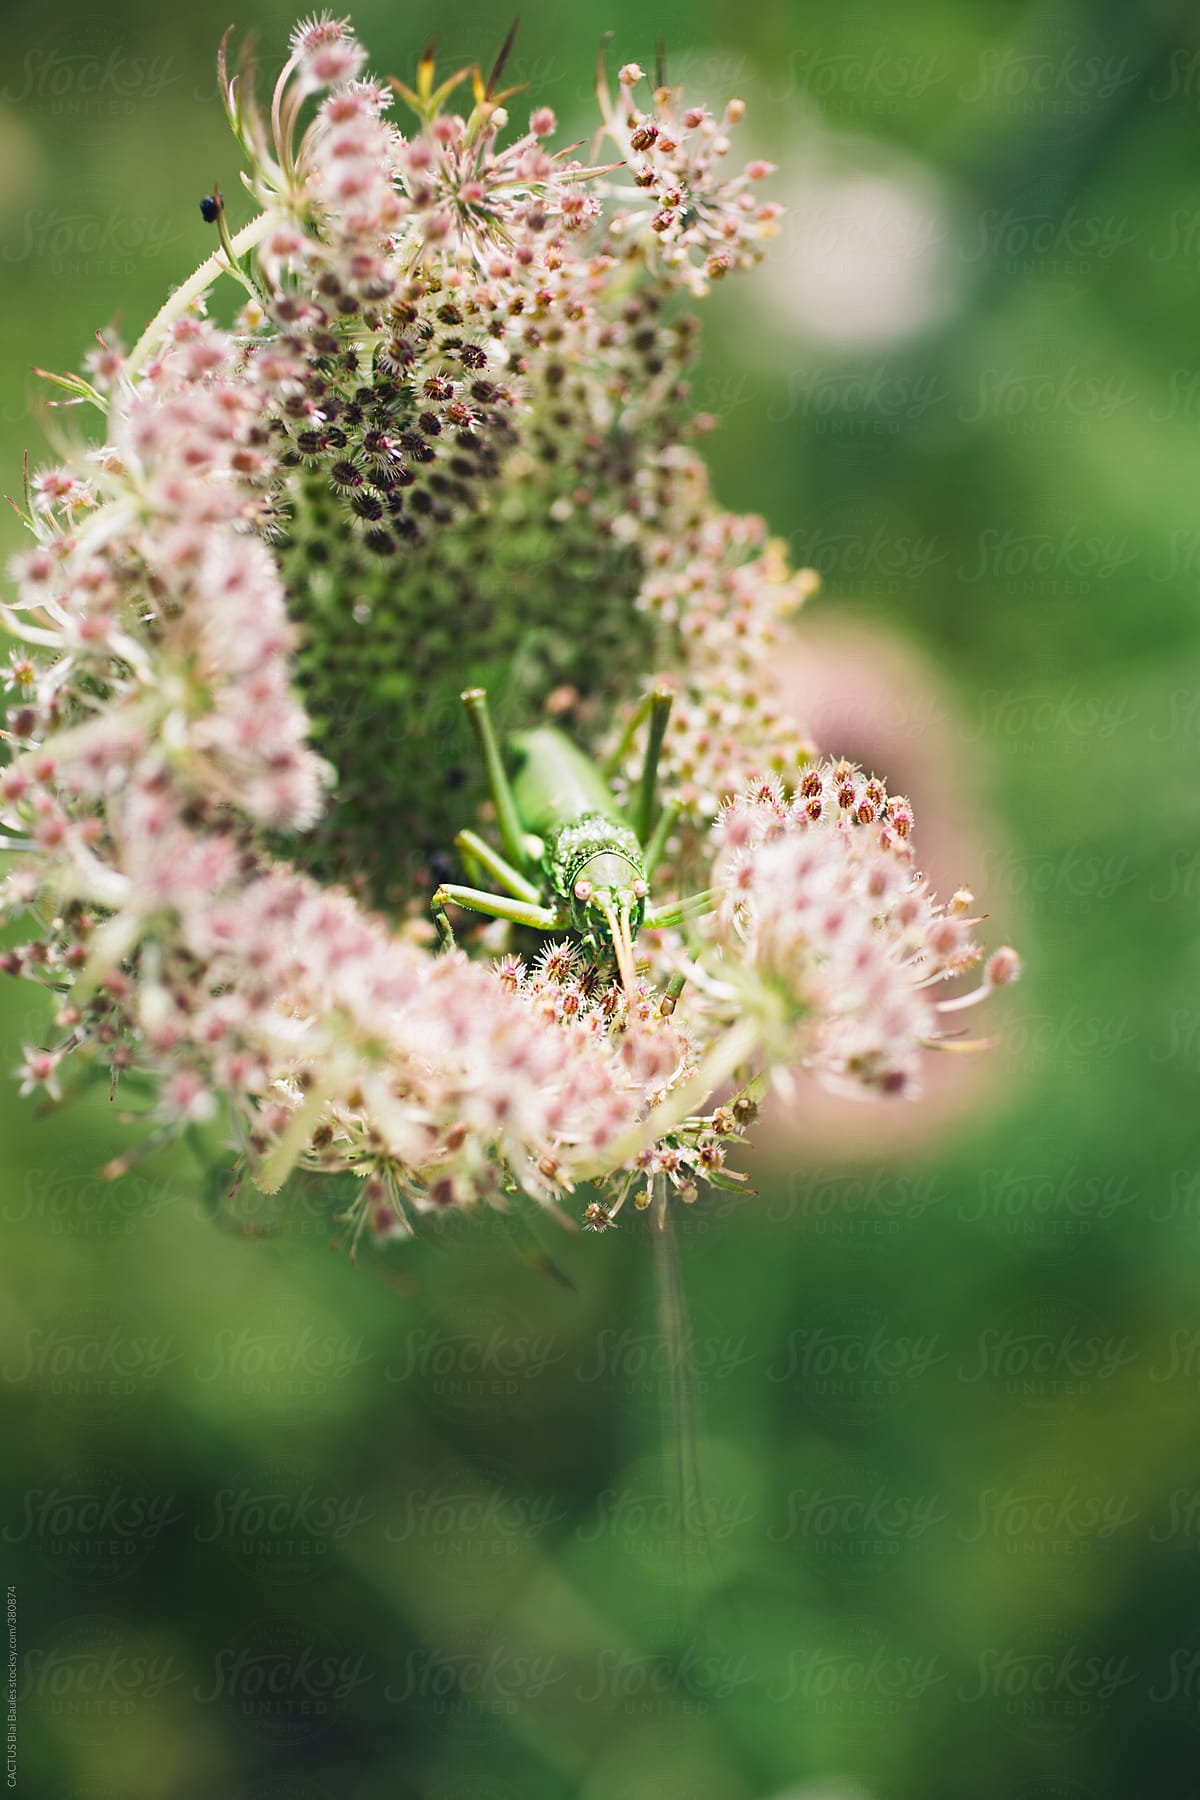 An insect on a flower